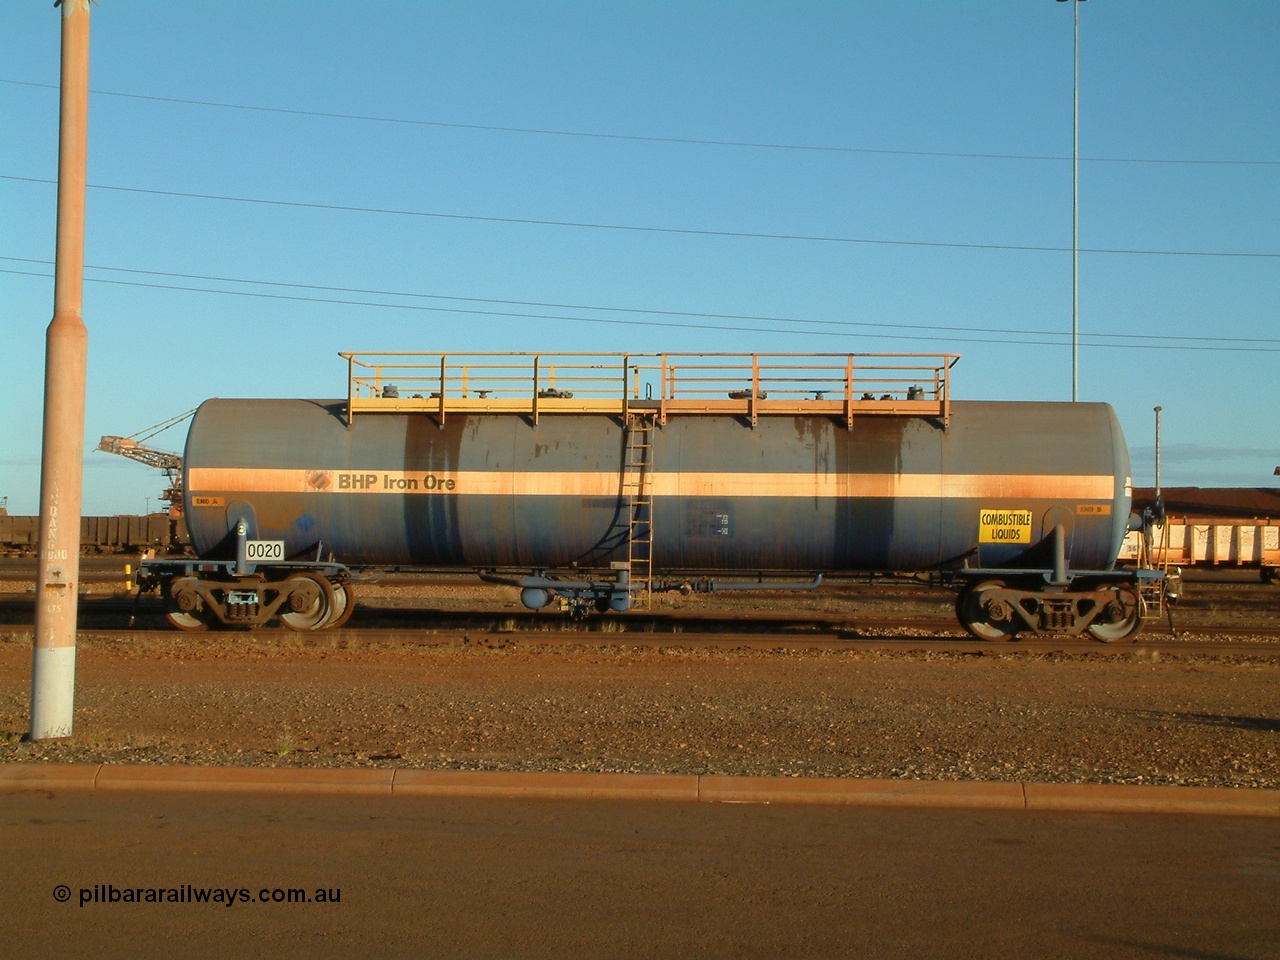 040815 171246
Nelson Point, side view of fuel tank waggon 0020, 82 kilolitre capacity built by Comeng NSW for BP as RTC 2, used by Mt Newman Mining, unsure when converted to 0020.
Keywords: Comeng-NSW;RTC2;BHP-tank-waggon;